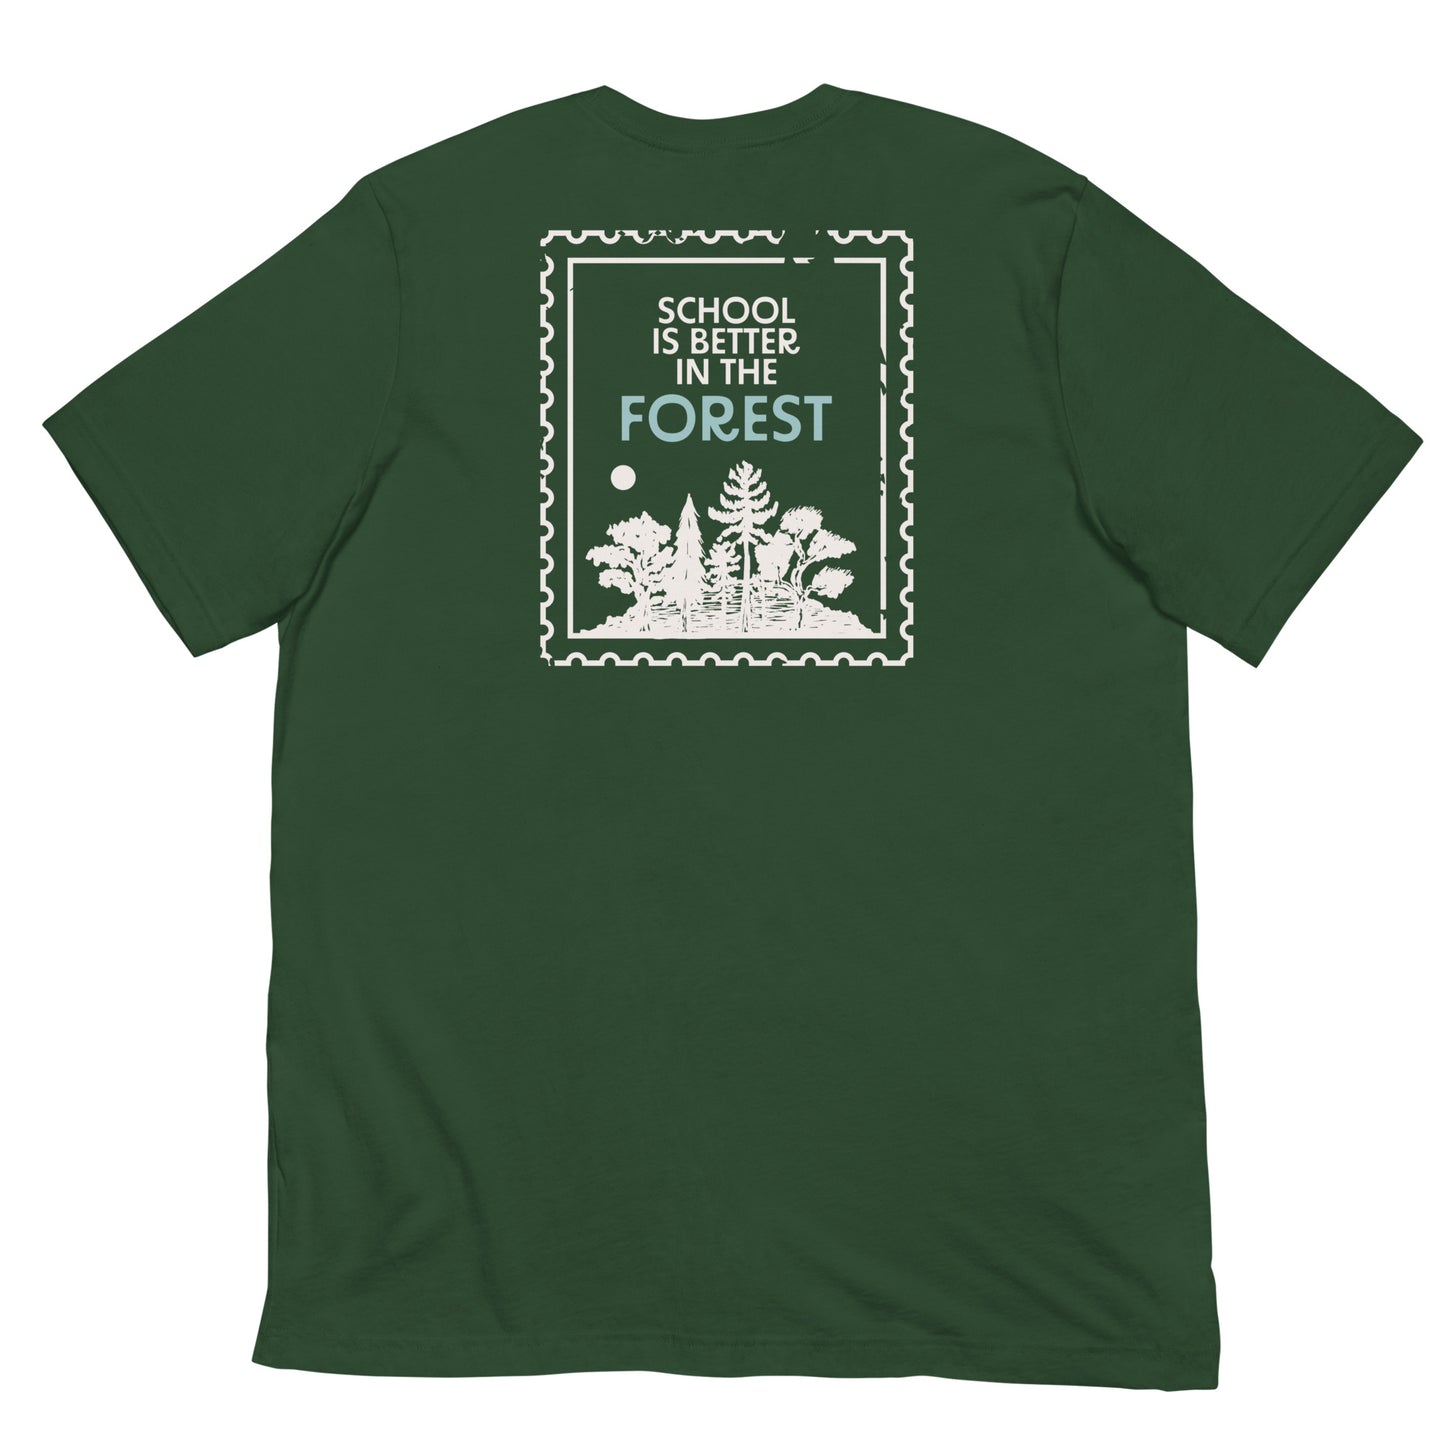 School Is Better In The Forest Adult Size T-Shirt